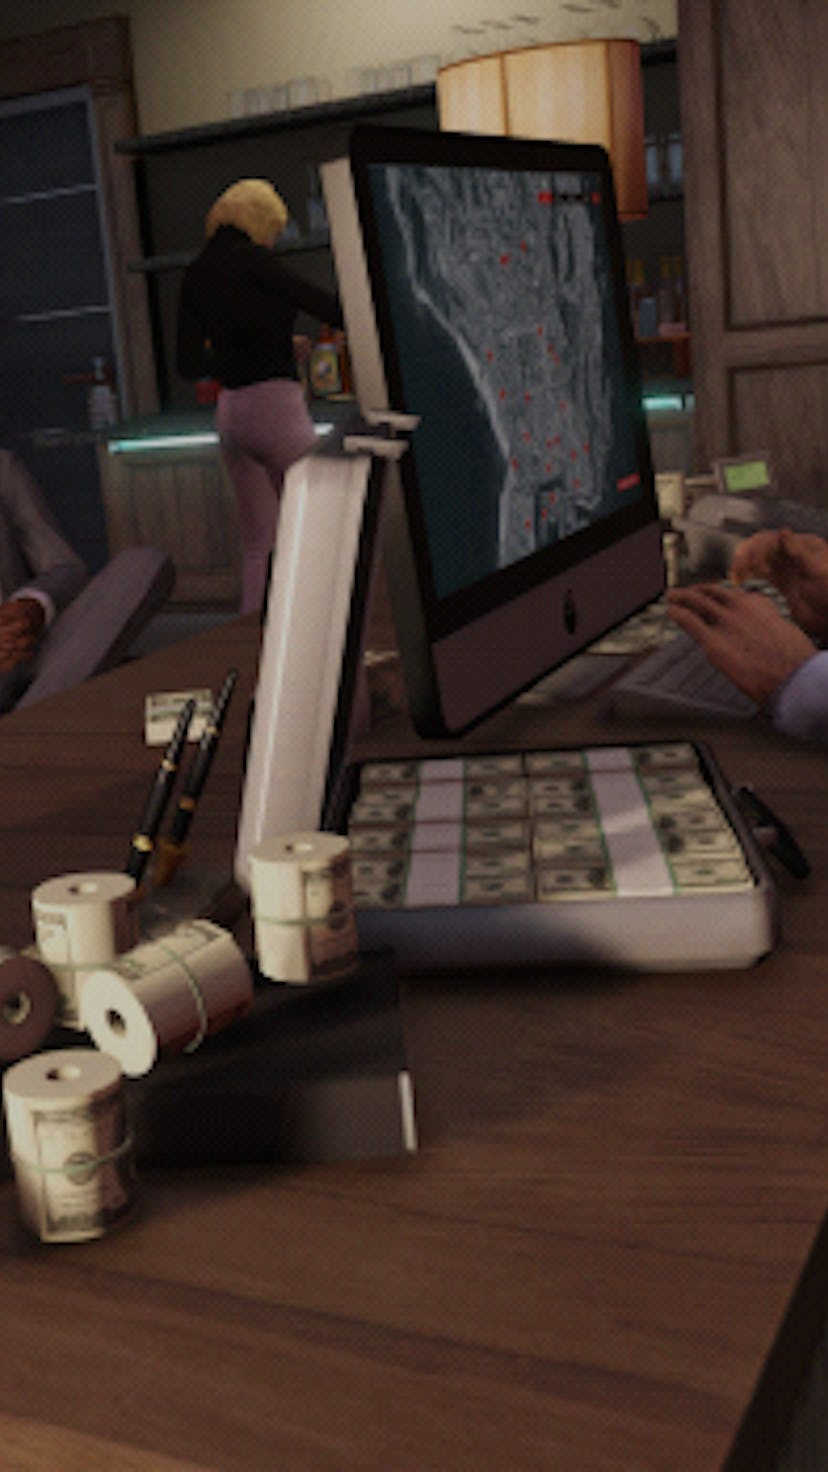 A screenshot from the story mode of Grand Theft Auto V. Video games. Gaming. Rockstar games.